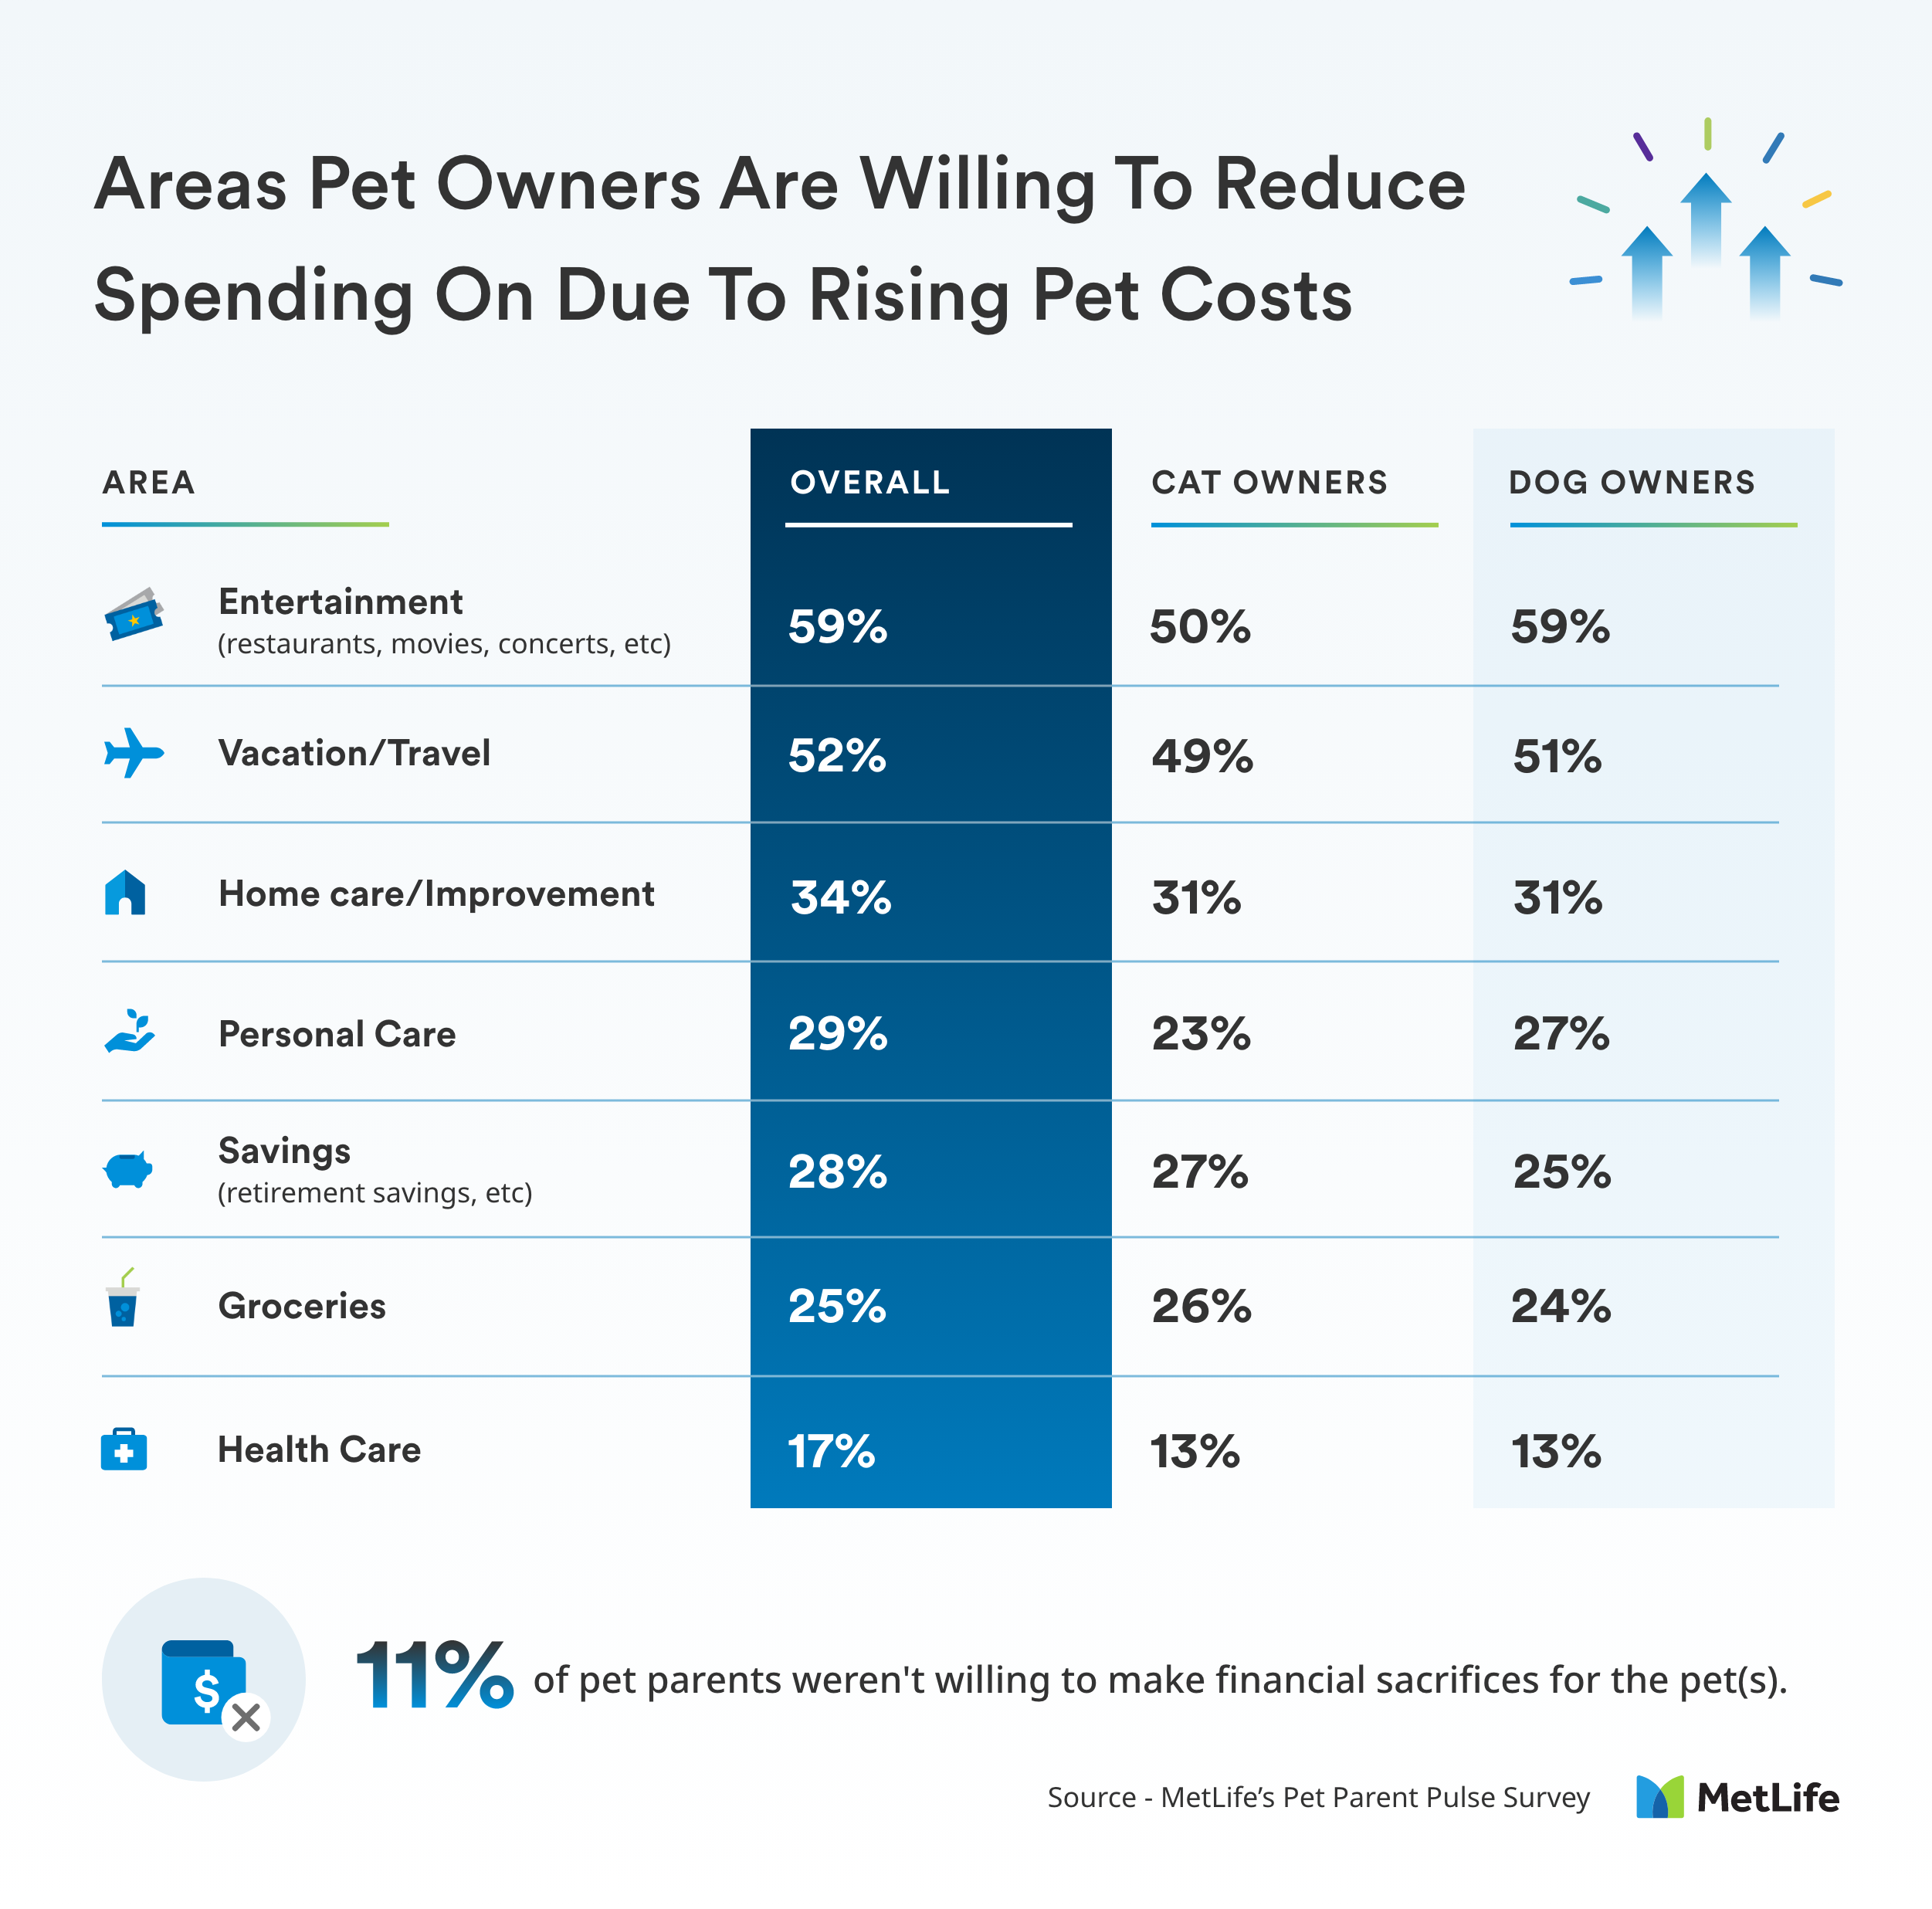 Areas Owners Would Cut Spending on for their Pets: 59% would cut entertainment; 25% groceries; 17% healthcare; 34% home care; 29% personal care; 28% savings; 52% travel; 11% not OK with financial sacrifices for their pets